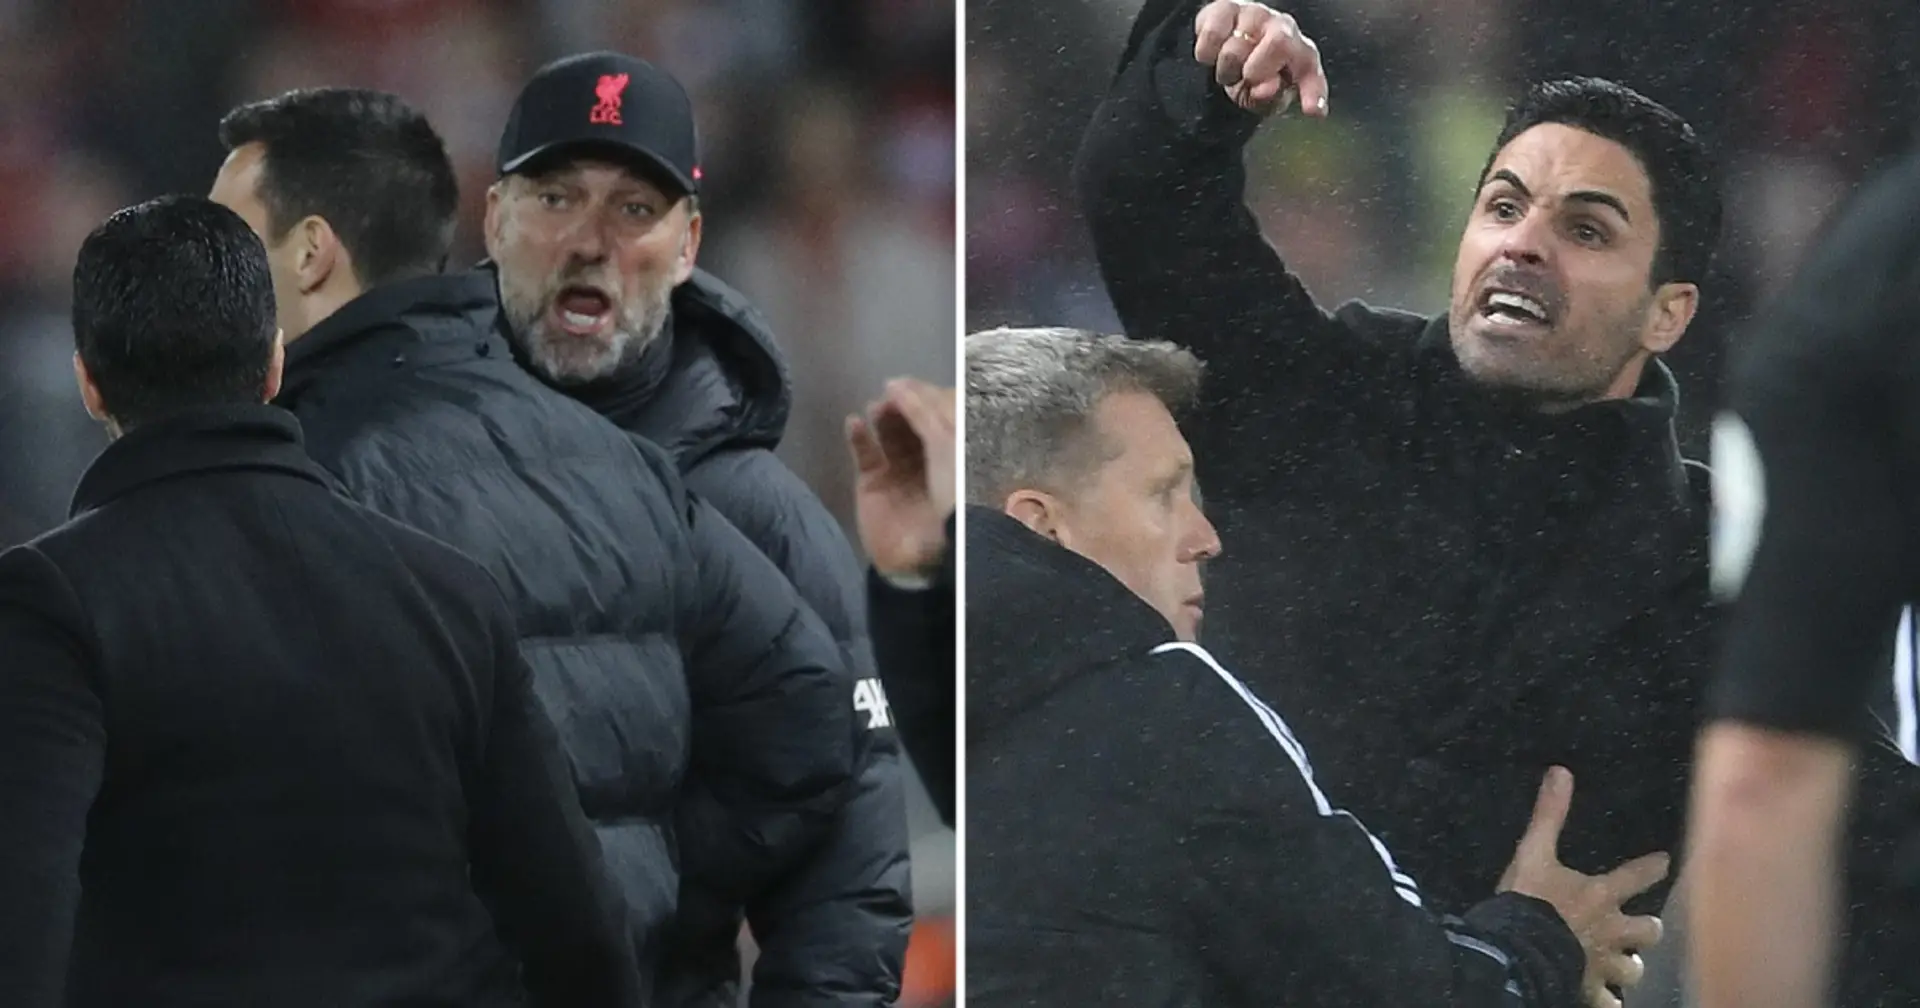 Jurgen Klopp called 'the villain' for his role in touchline row with Mikel Arteta